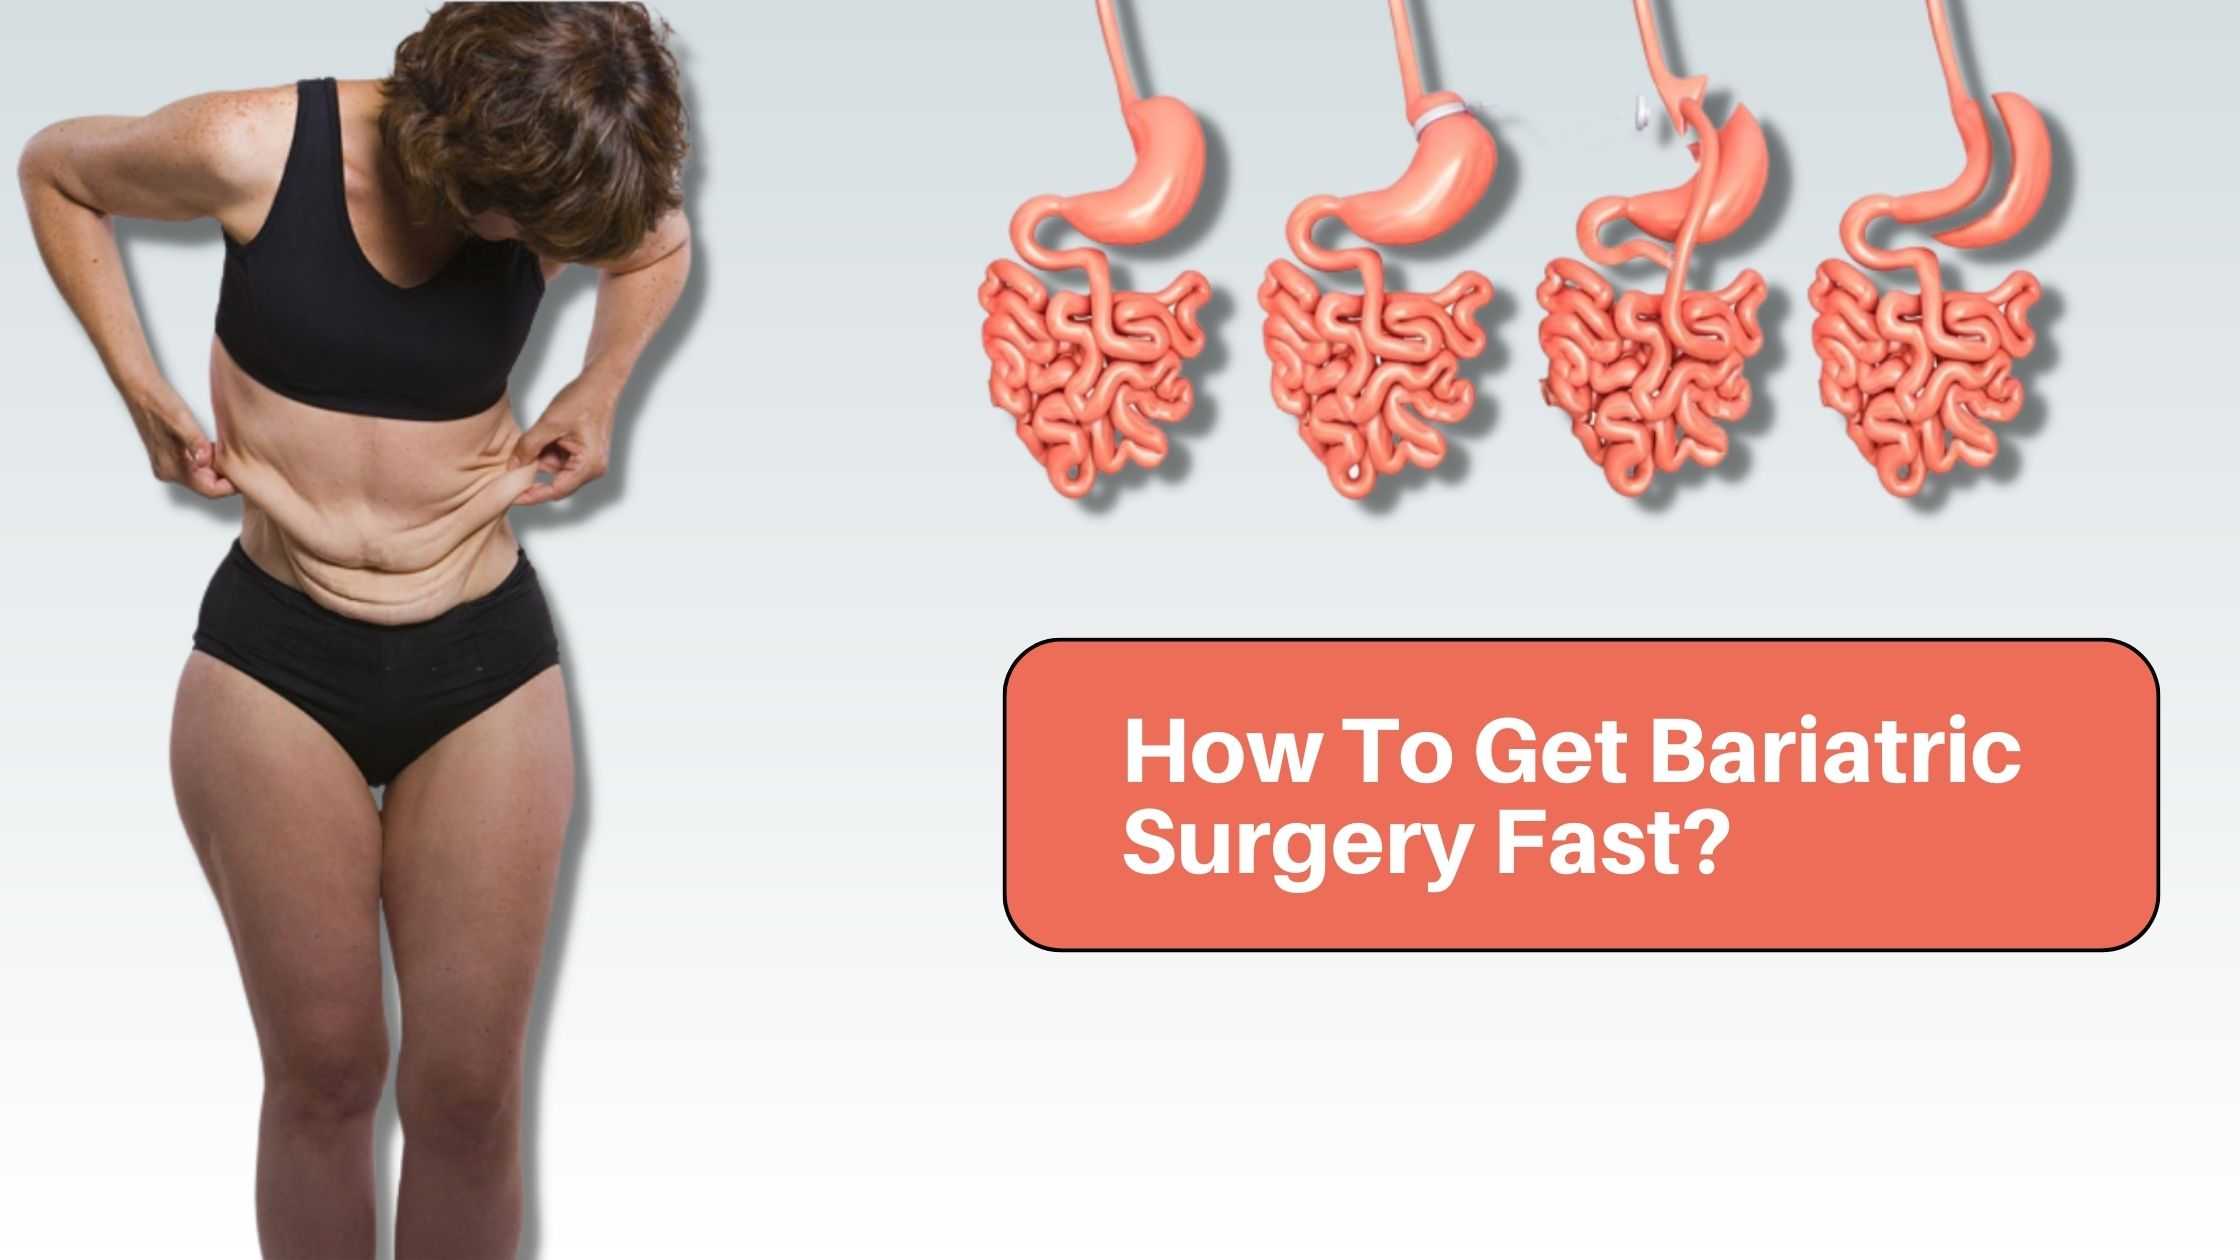 How To Get Bariatric Surgery Fast